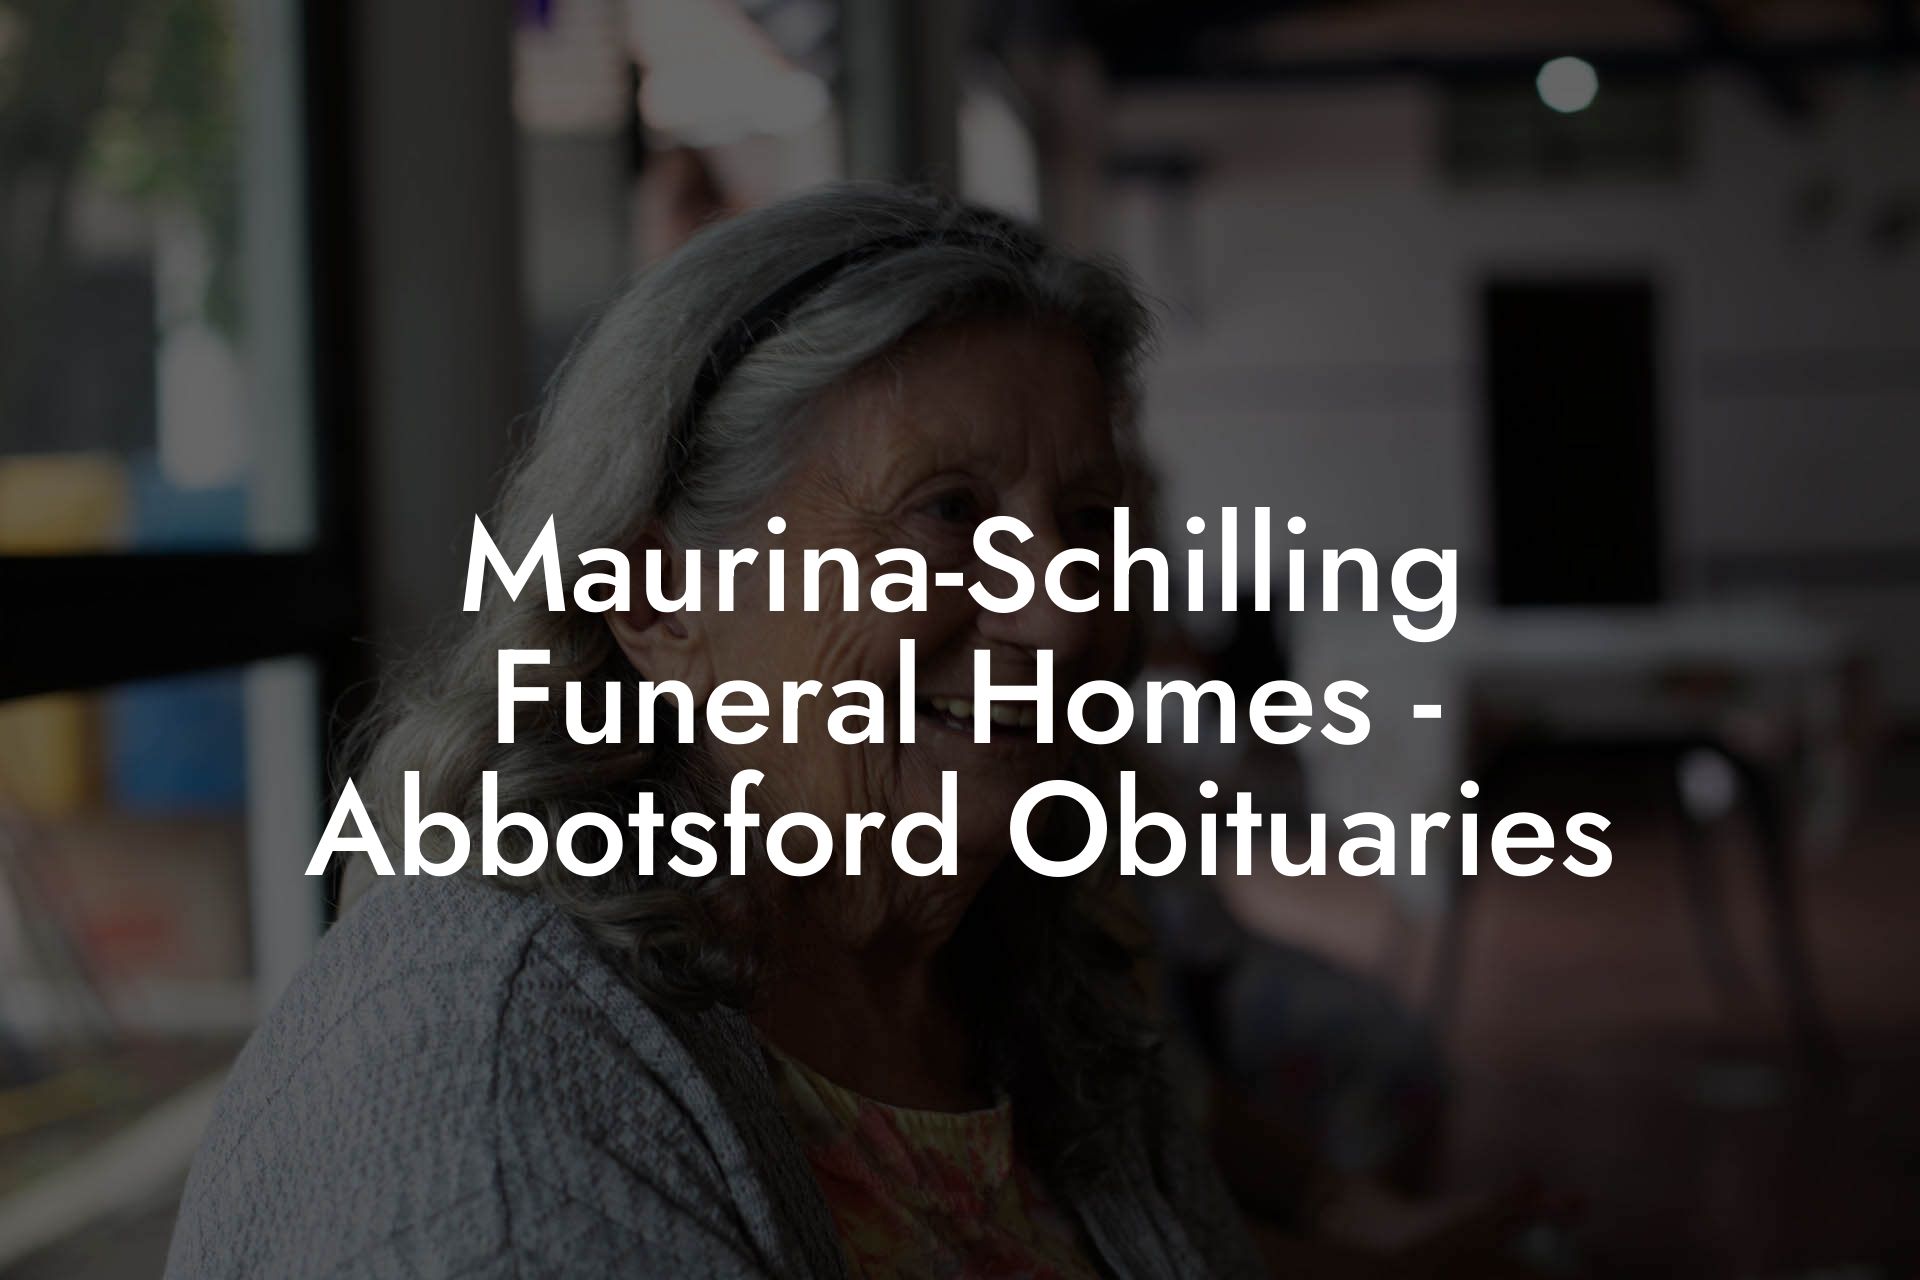 Maurina-Schilling Funeral Homes - Abbotsford Obituaries